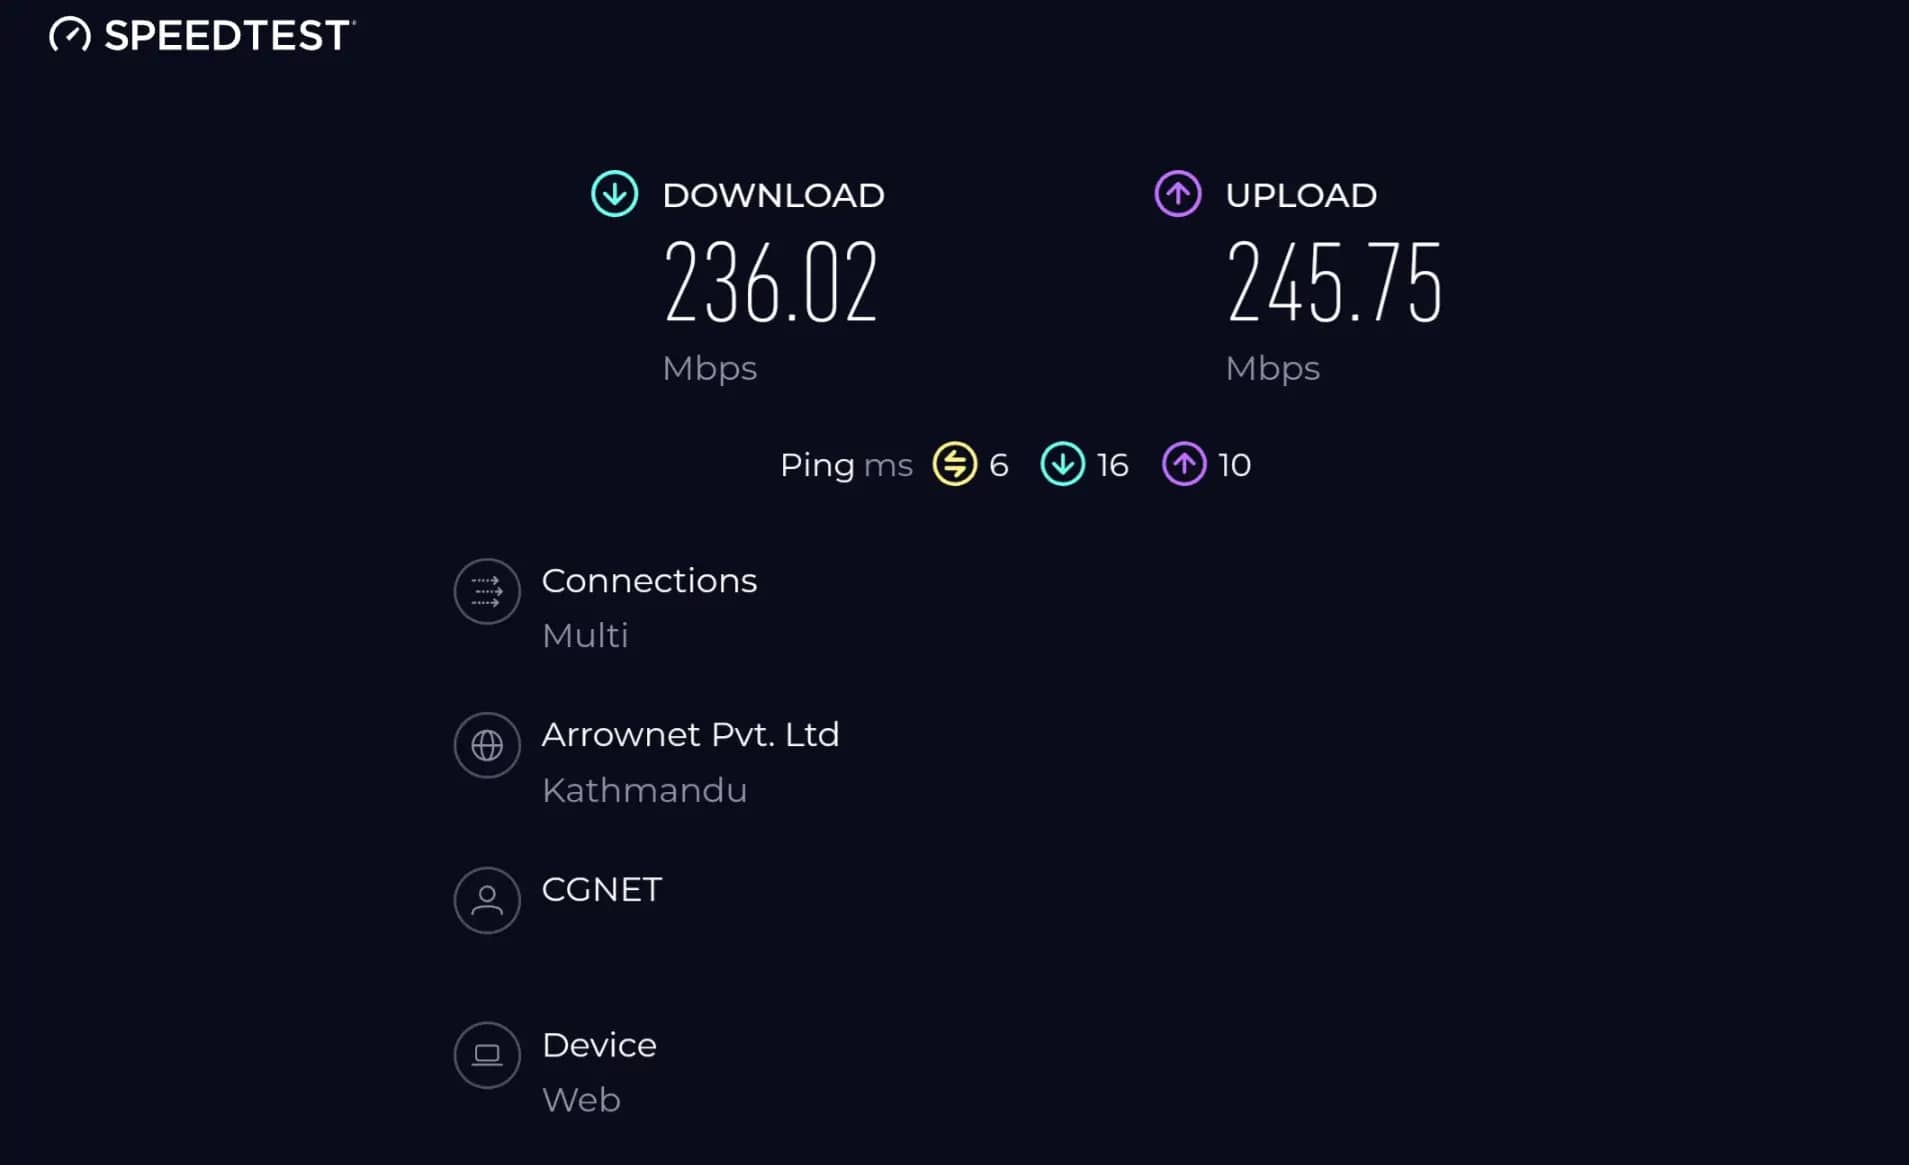 Cg Net Internet Speed In Nepal Over 230 Mbps For Residental Plan Checked From Wireless Connection